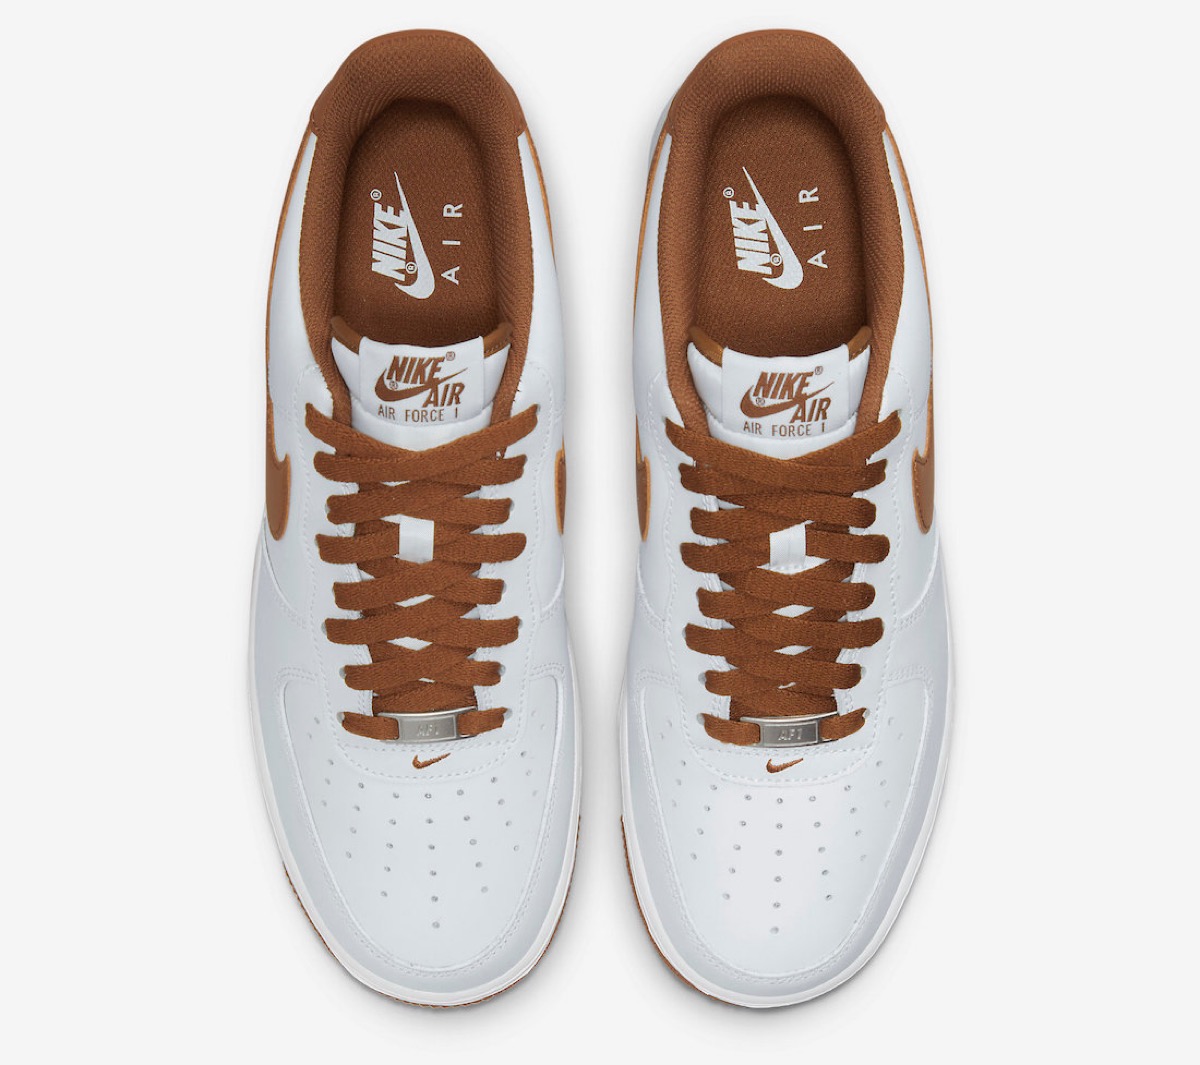 Nike Air Force 1 '07 “White/Pecan”が国内3月12日より発売予定 | UP ...